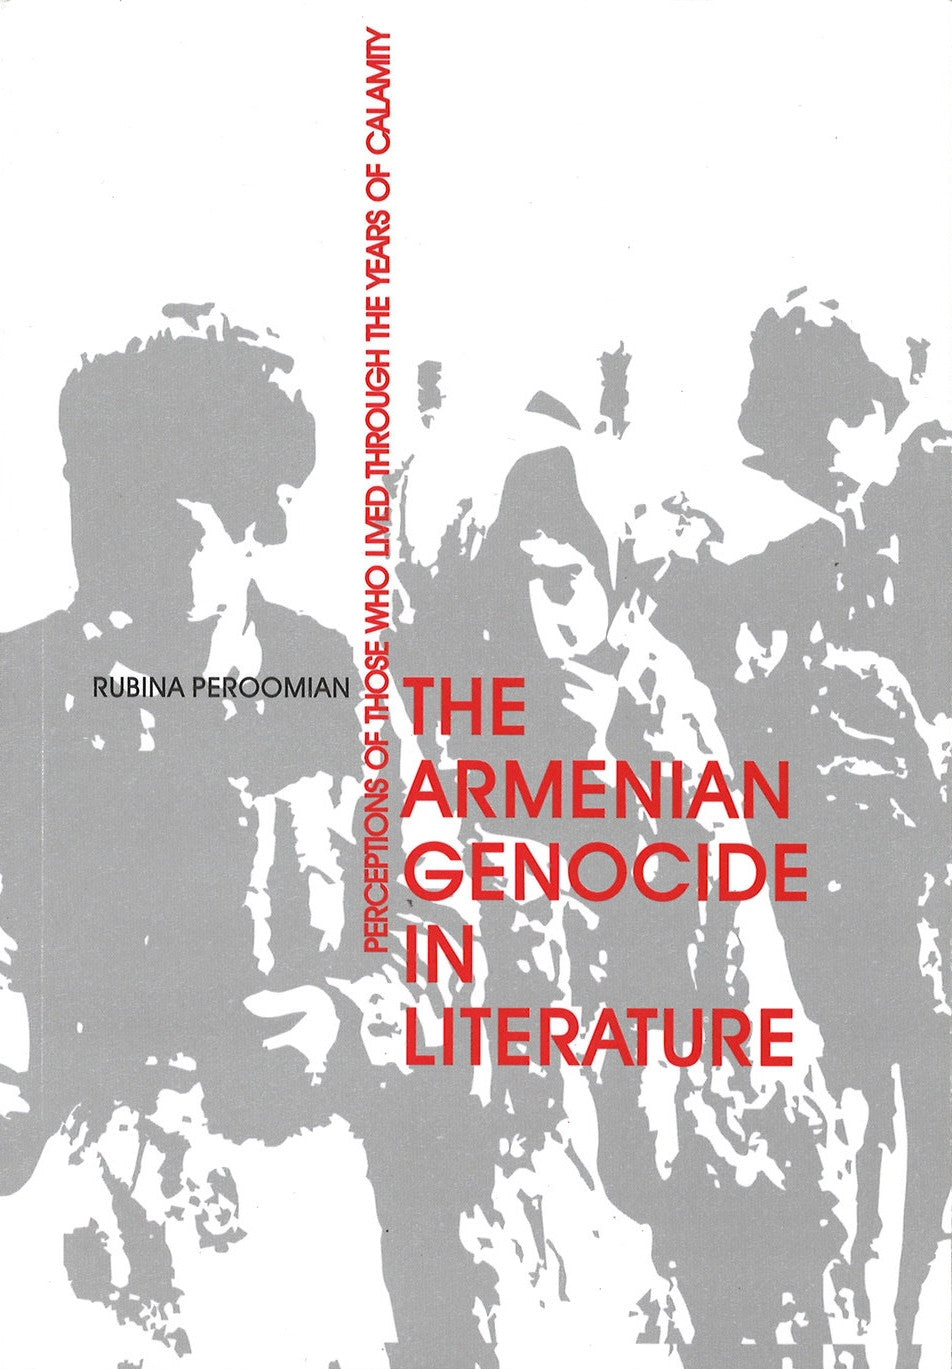 ARMENIAN GENOCIDE IN LITERATURE: PERCEPTIONS OF THOSE WHO LIVED THROUGH THE YEARS OF CALAMITY